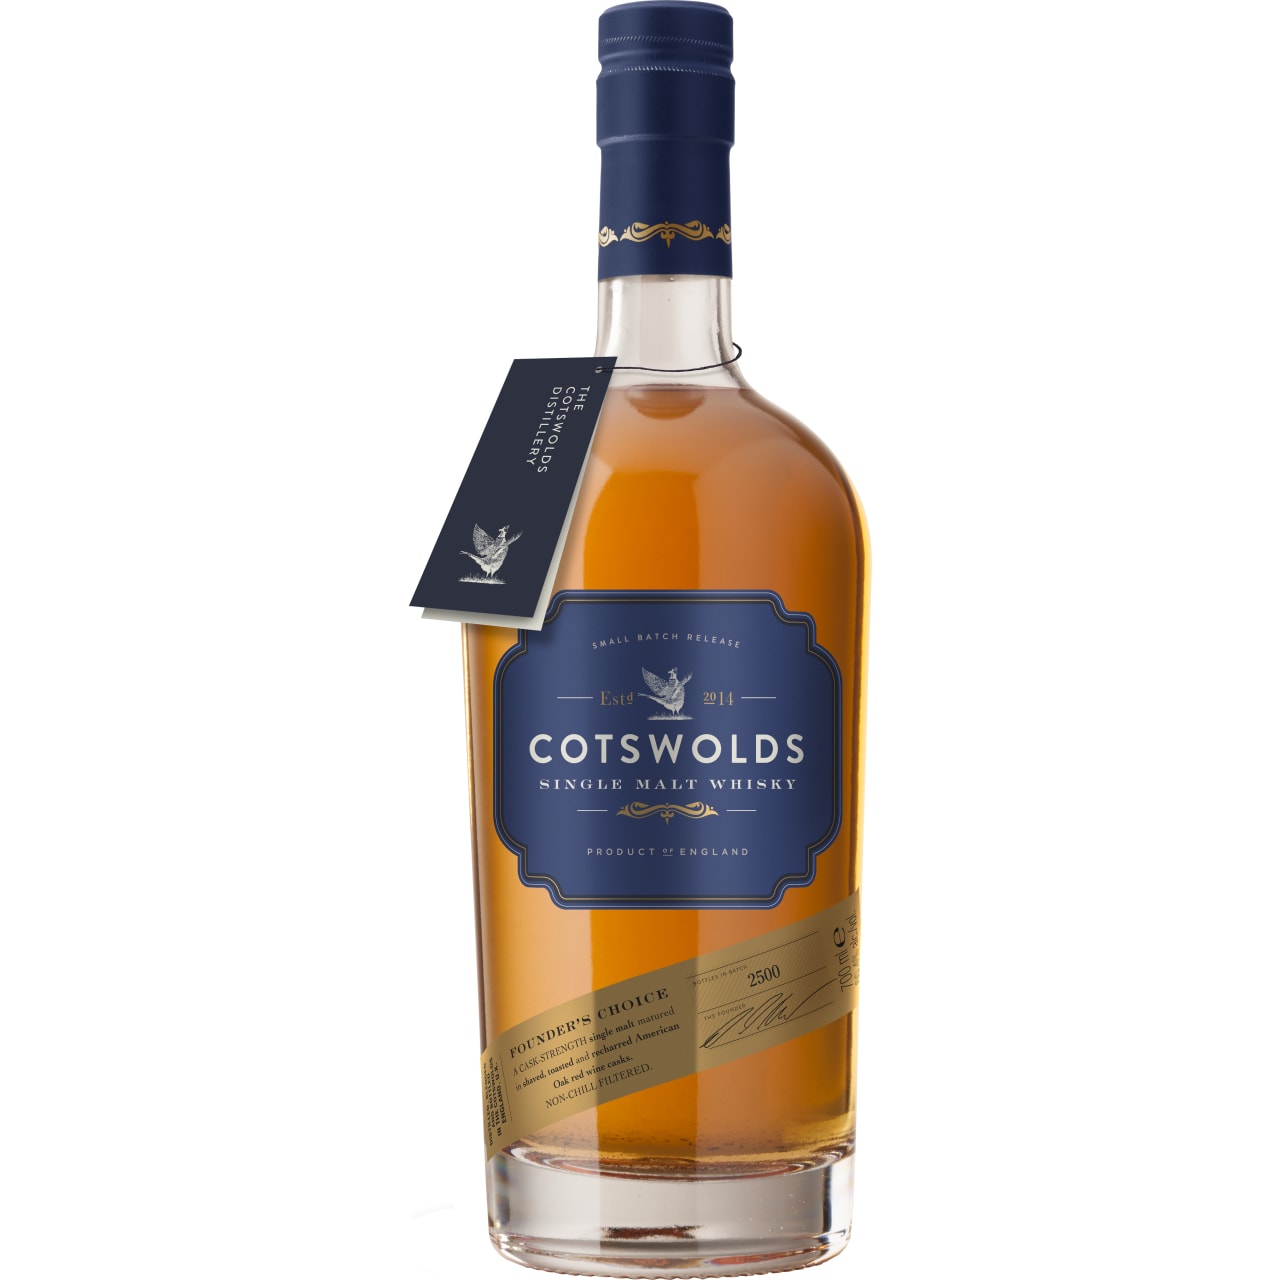 Product Image - Cotswolds Founder's Choice Single Malt Whisky